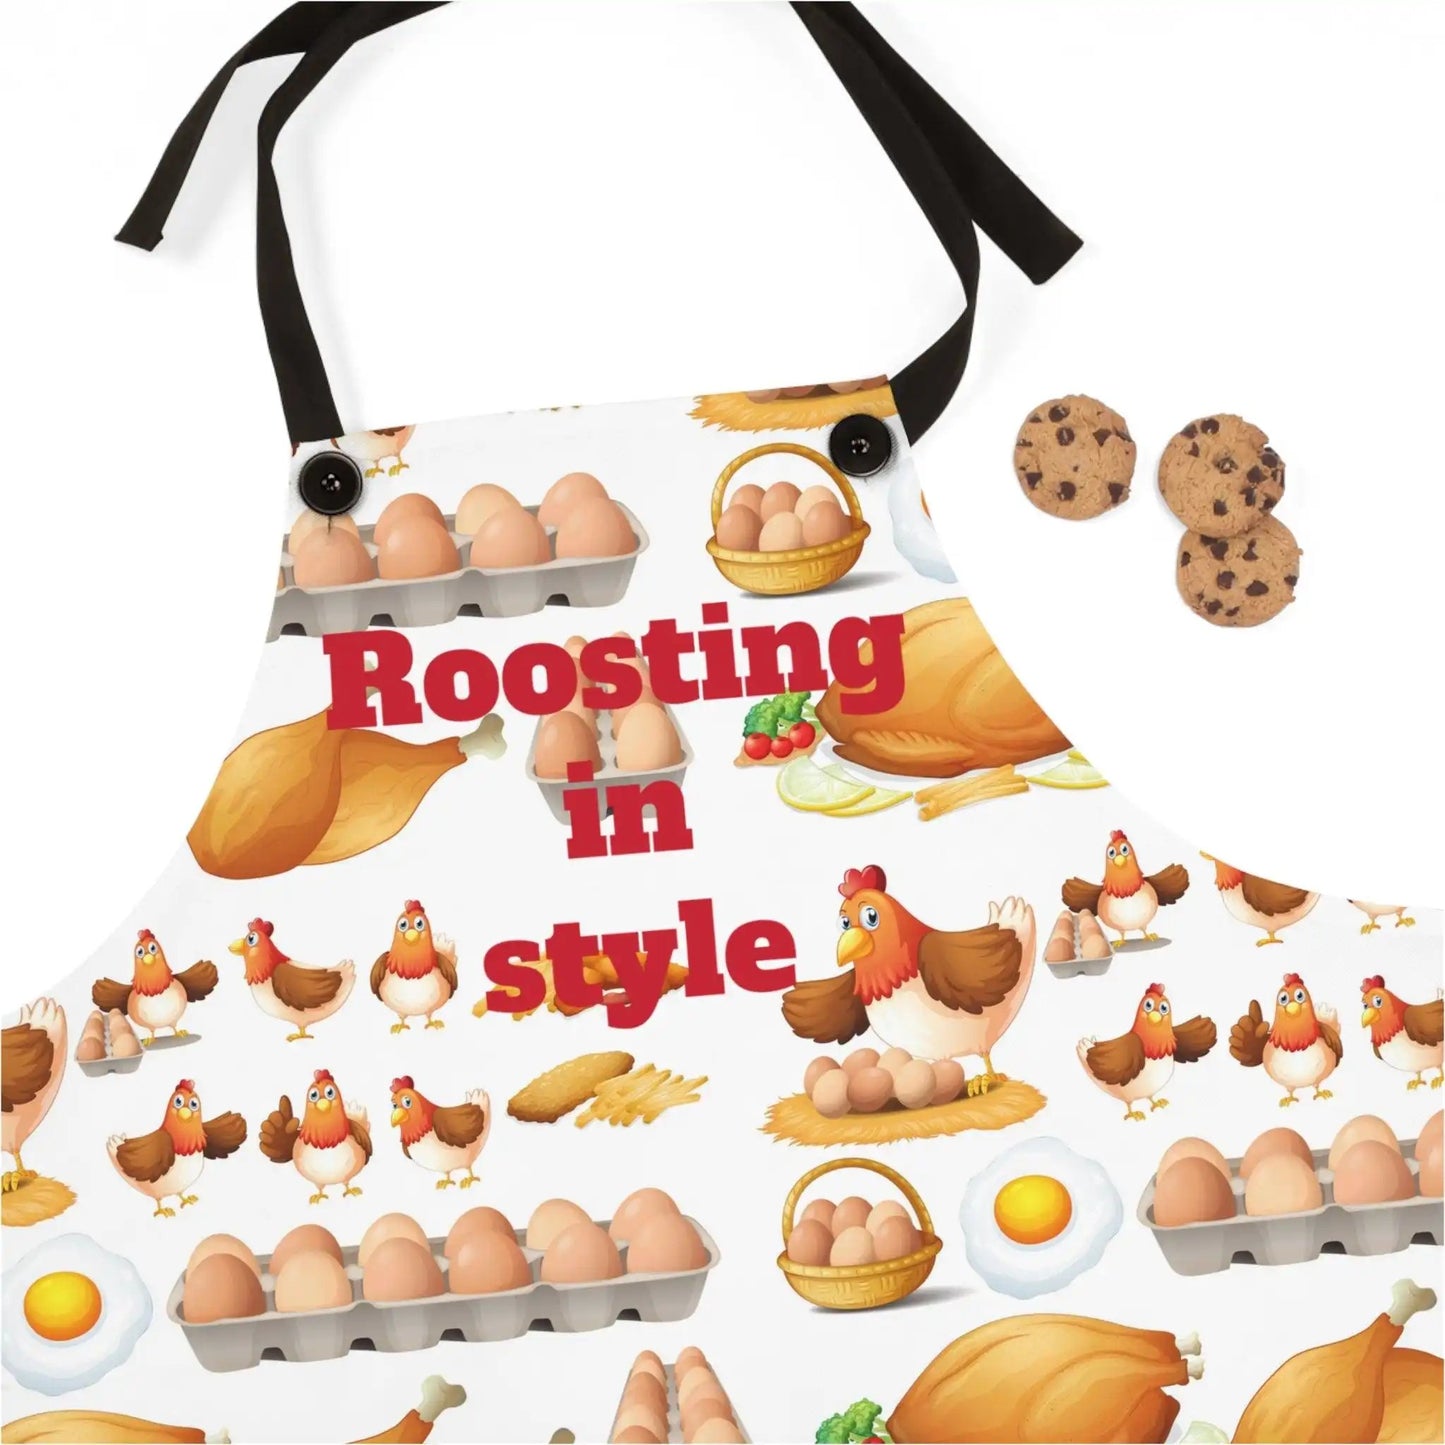 Roosting in Style Chicken Apron (AOP)Our Poly Twill Apron is the perfect cooking accessory. Lightweight, stylish and durable, this apron with your custom design and will make your customers look great dStyle Chicken Apron (AOP)The Hufeisen-Ranch (WYO Wagyu)Accessories